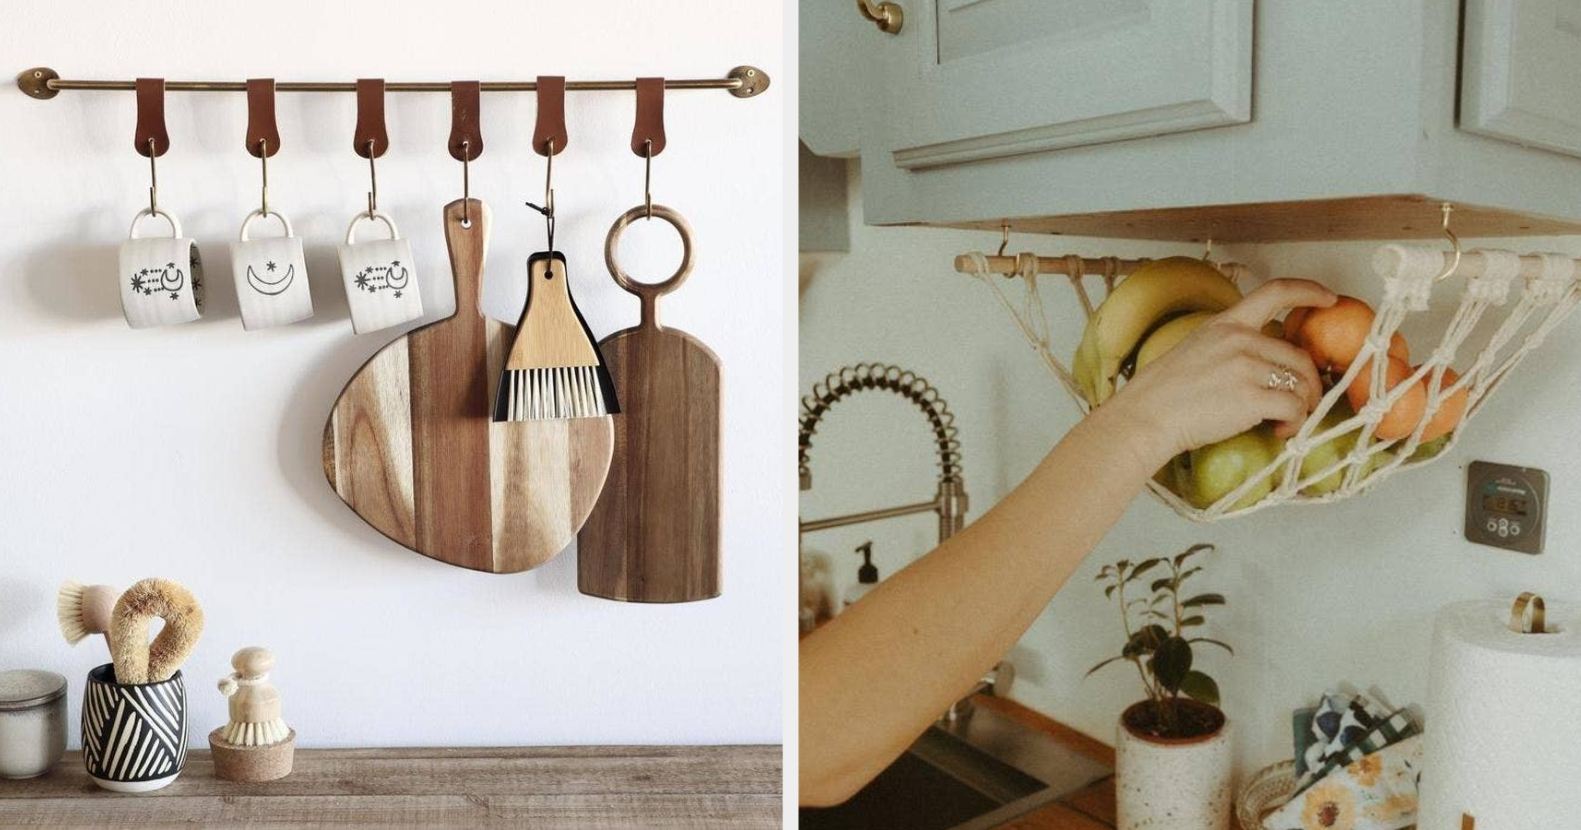 32 Storage Solutions That'll Help Before The Holidays